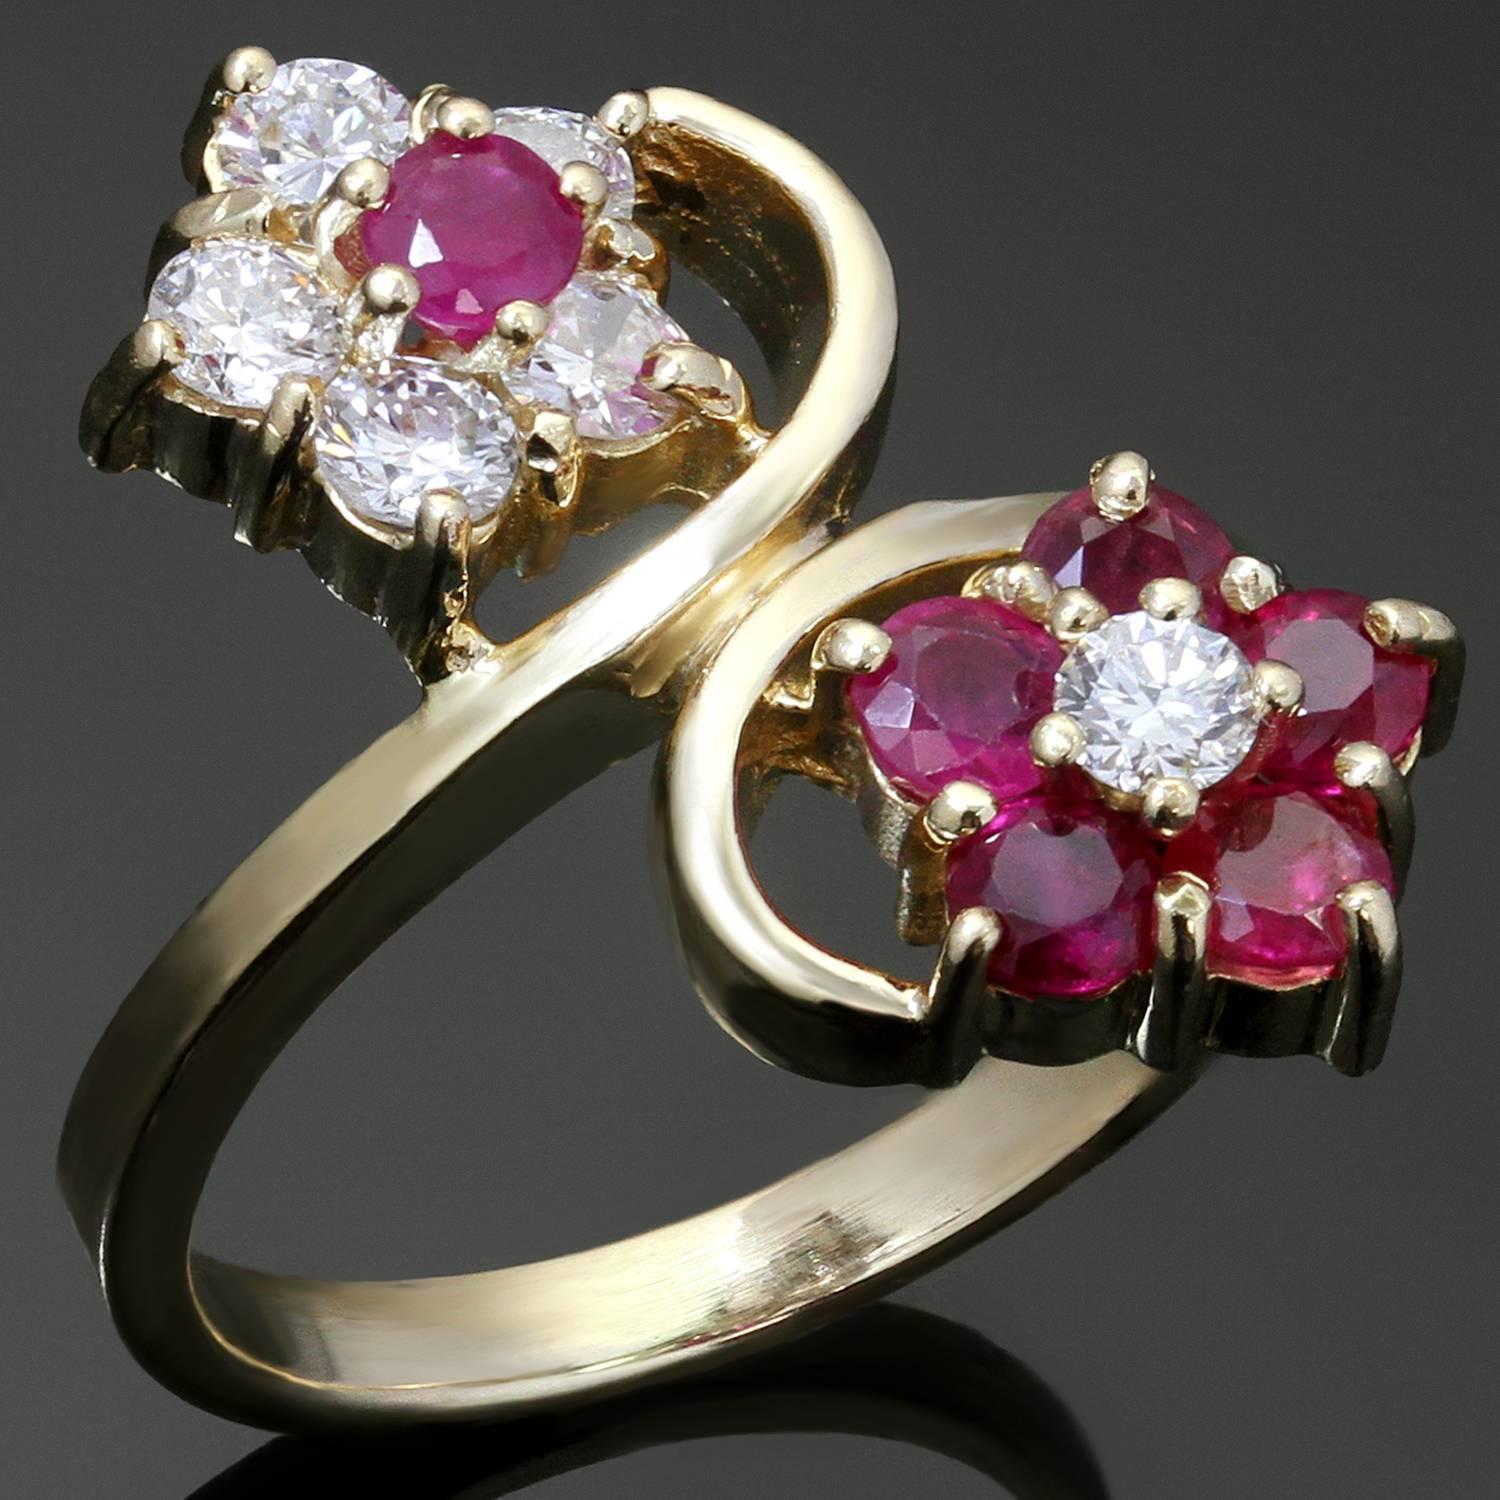 This gorgeous vintage ring features a whimsical two flower design crafted in 14k yellow gold and set with brilliant-cut round diamonds of an estimated 0.40 carats and red rubies of an estimated 0.50 carats. Made in United States circa 1980s. 